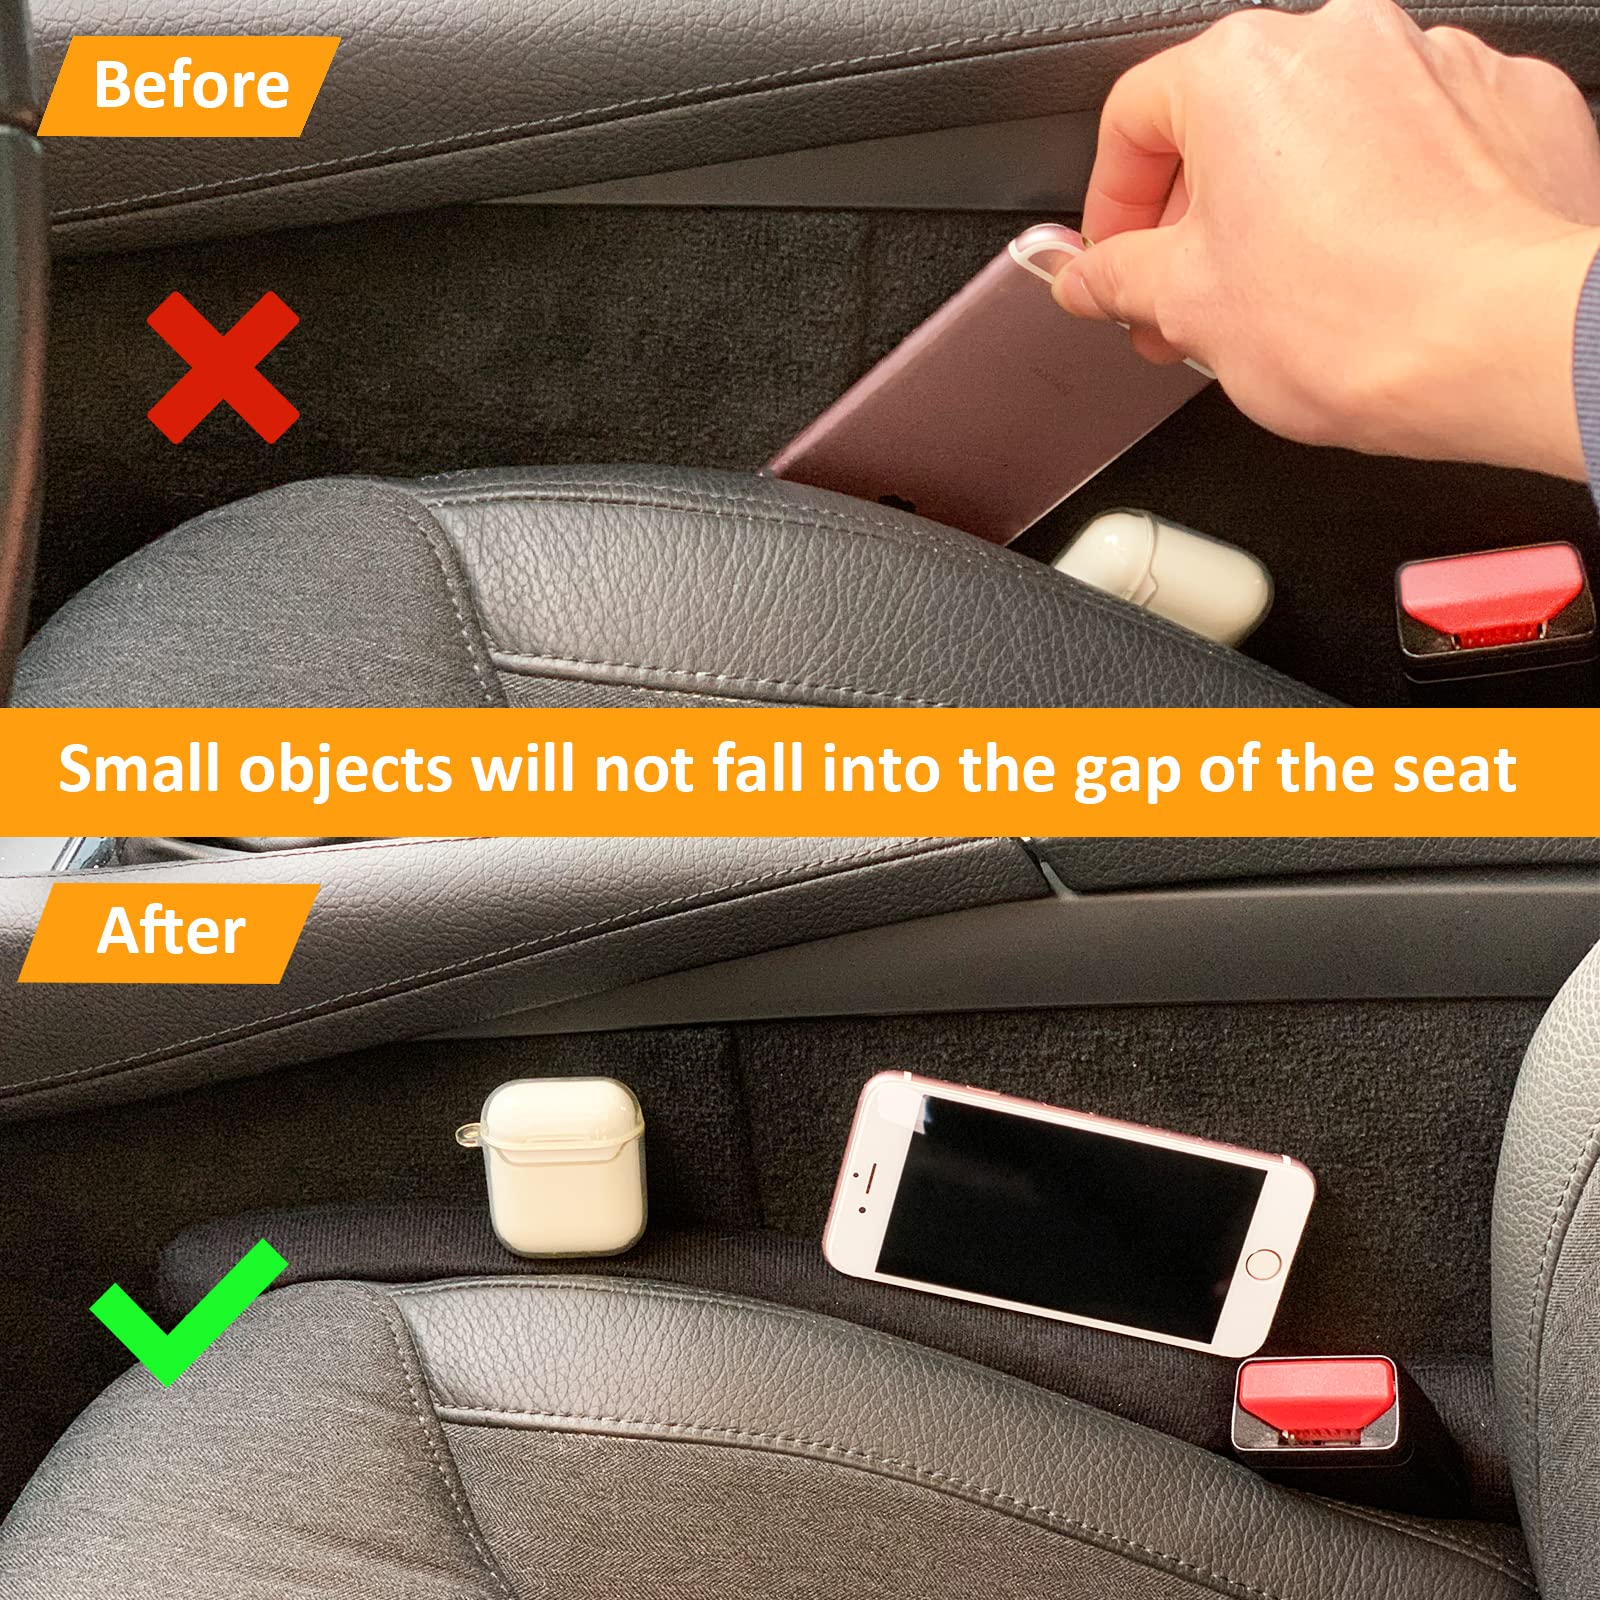 YLXGT Car Seat Gap Filler Universal for Car SUV Truck Fit Organizer Fill The Gap Between Seat and Console Stop Things from Dropping Black 2Pcs